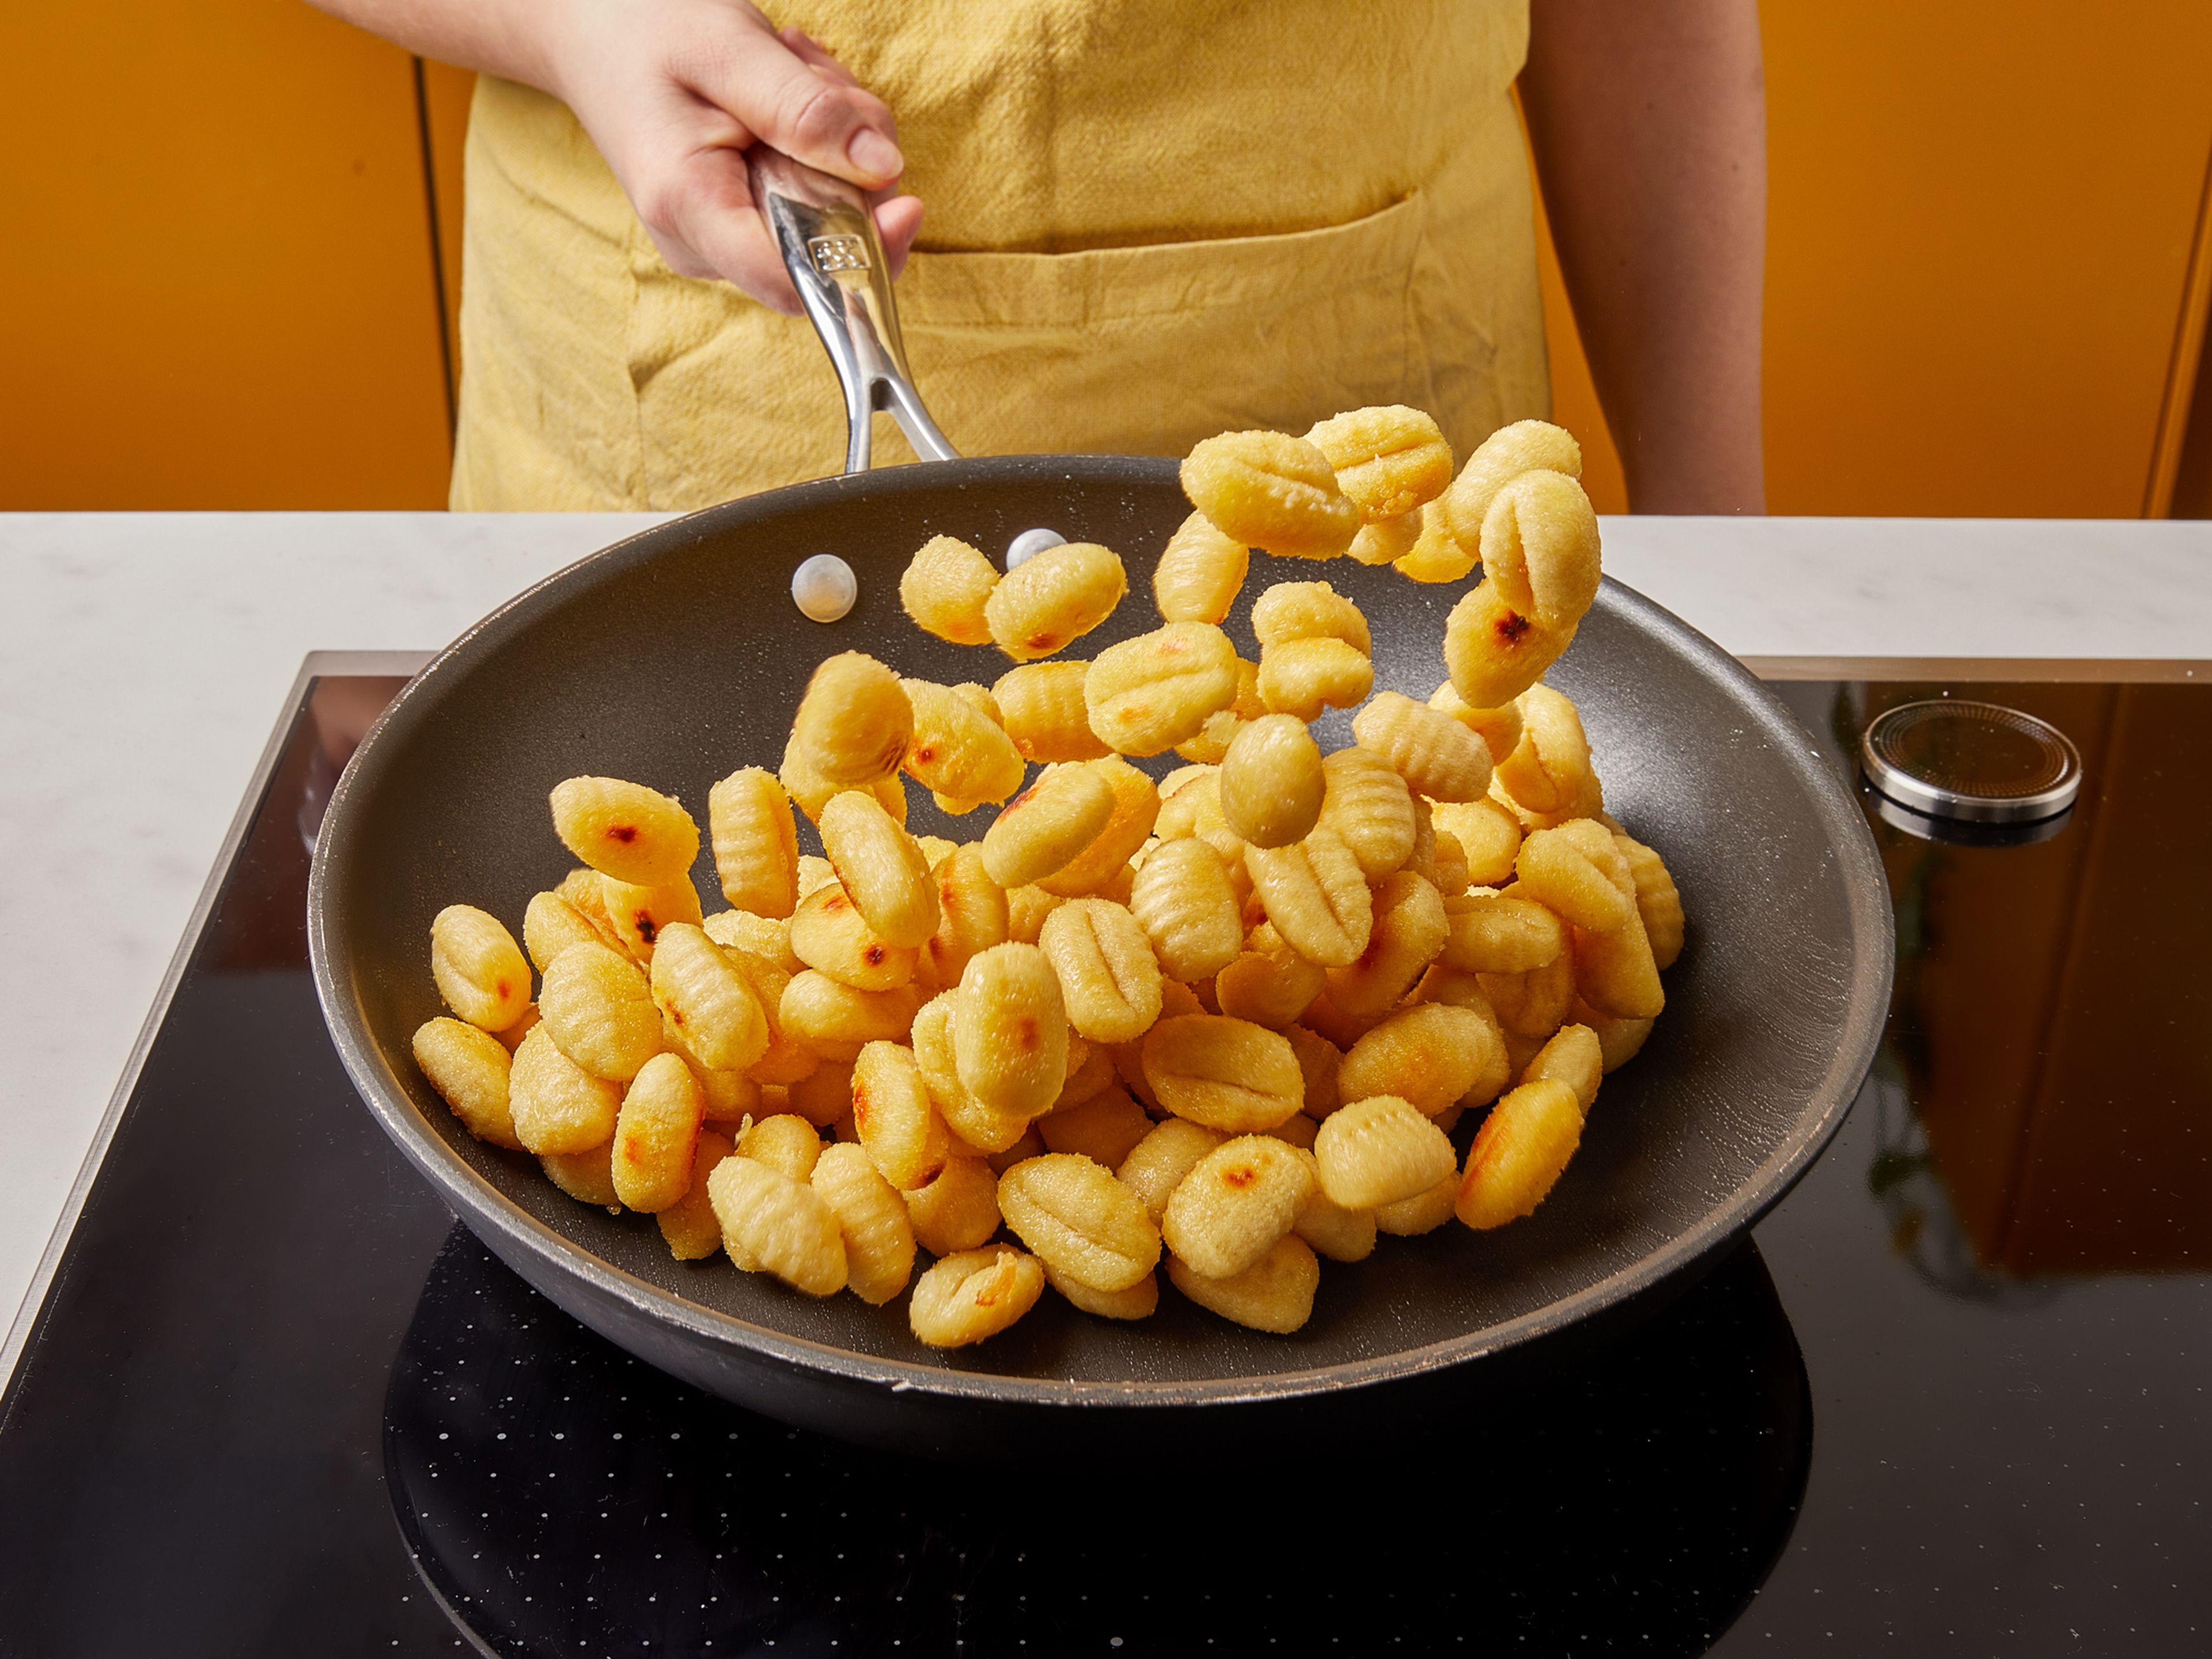 Preheat oven to 200°C/400°F. Pluck basil leaves from stems. Remove the casings from the sausage and discard, then roughly chop sausage. In a frying pan, add some oil and sauté the gnocchi until golden brown on both sides.